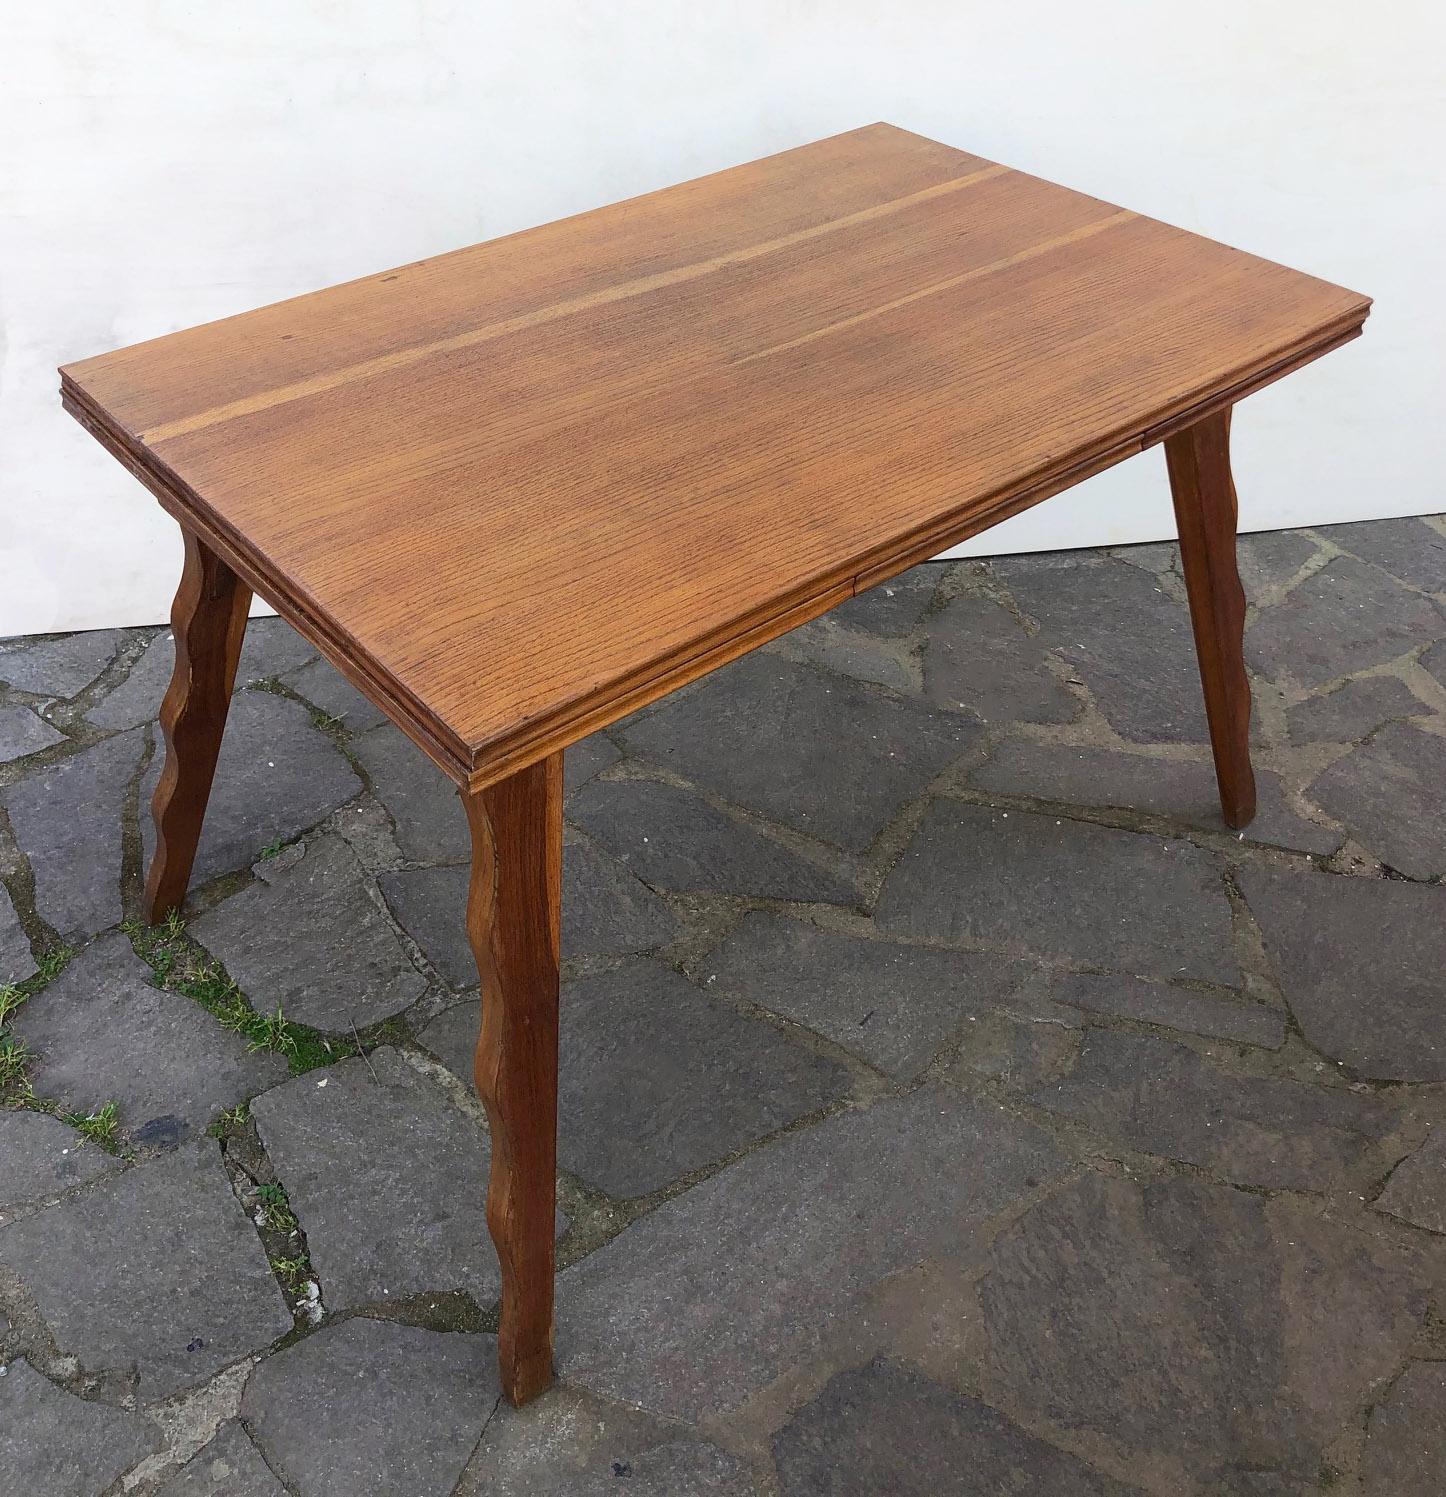 70s Natural Color Oak Table, Extendable, Honeycomb with Extensions, Scandinavian In Good Condition For Sale In Buggiano, IT